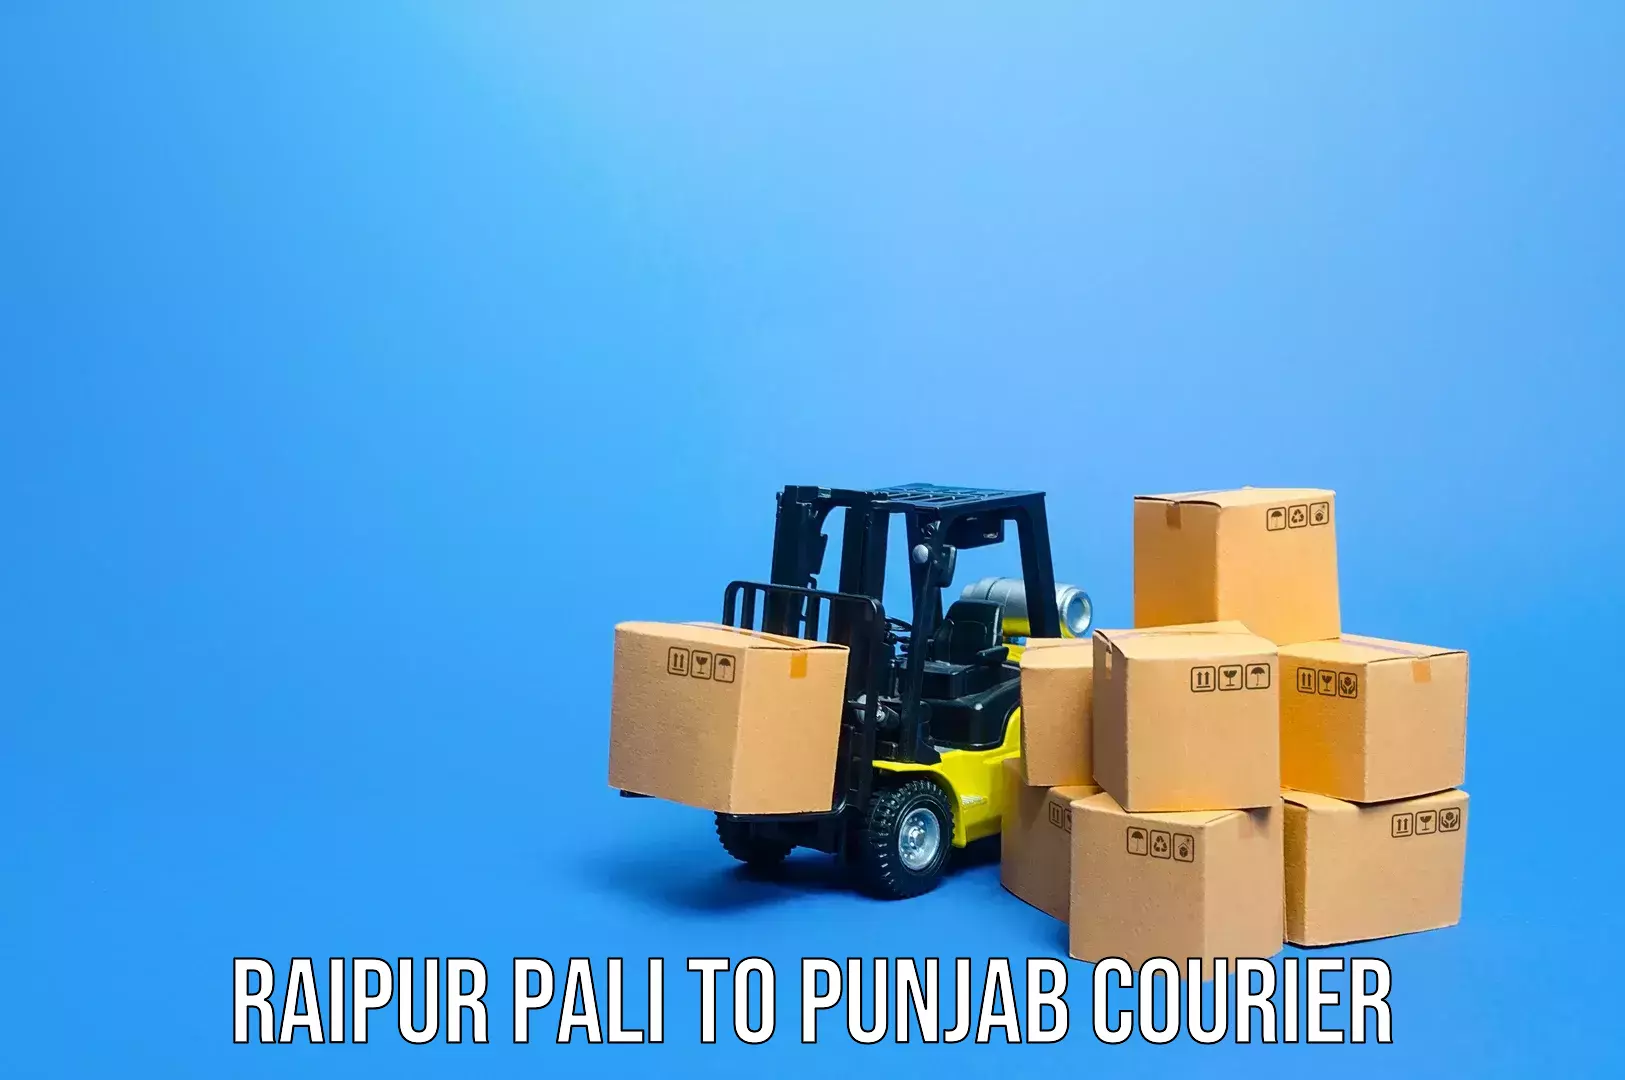 Airport luggage delivery Raipur Pali to Punjab